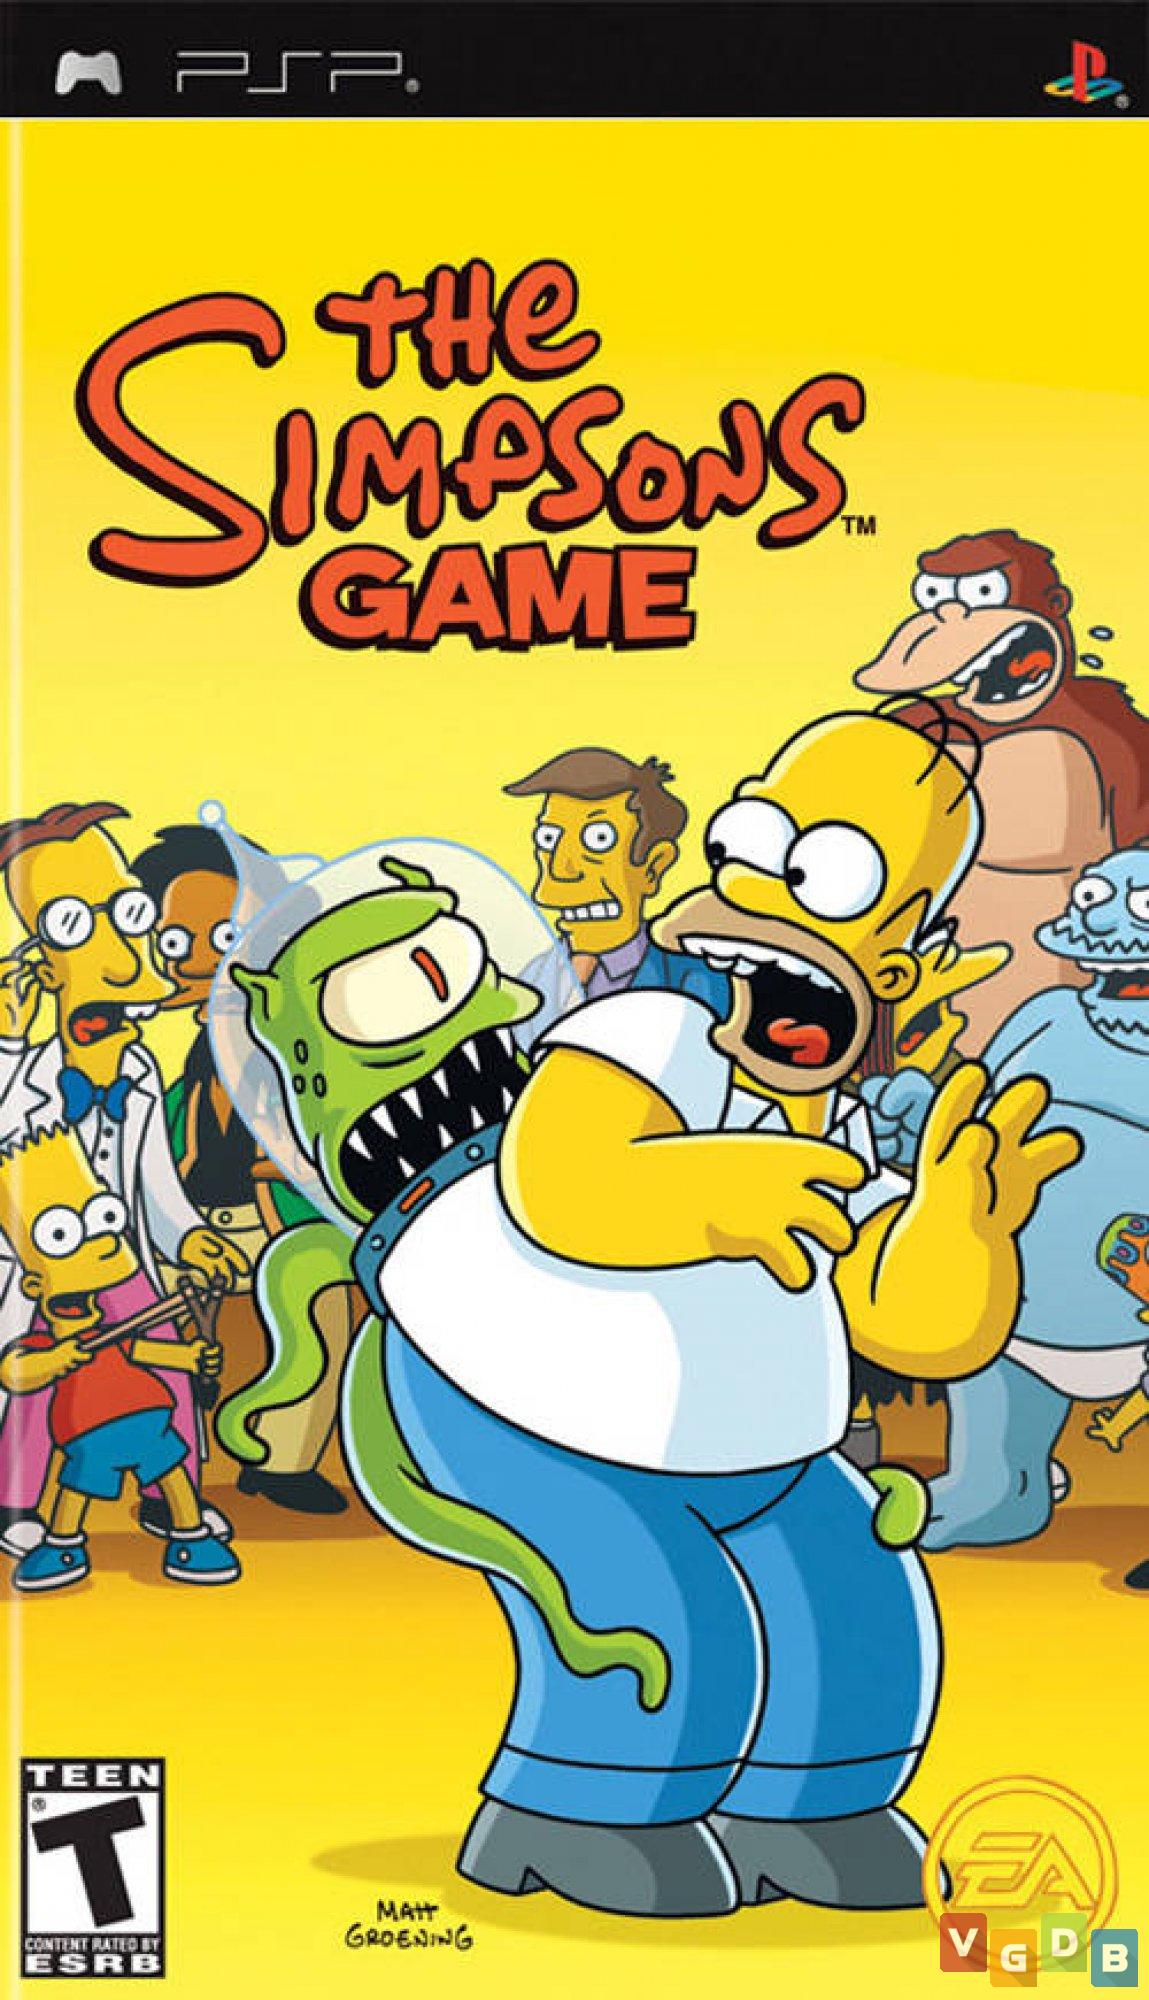 The Simpsons Game VGDB Vídeo Game Data Base